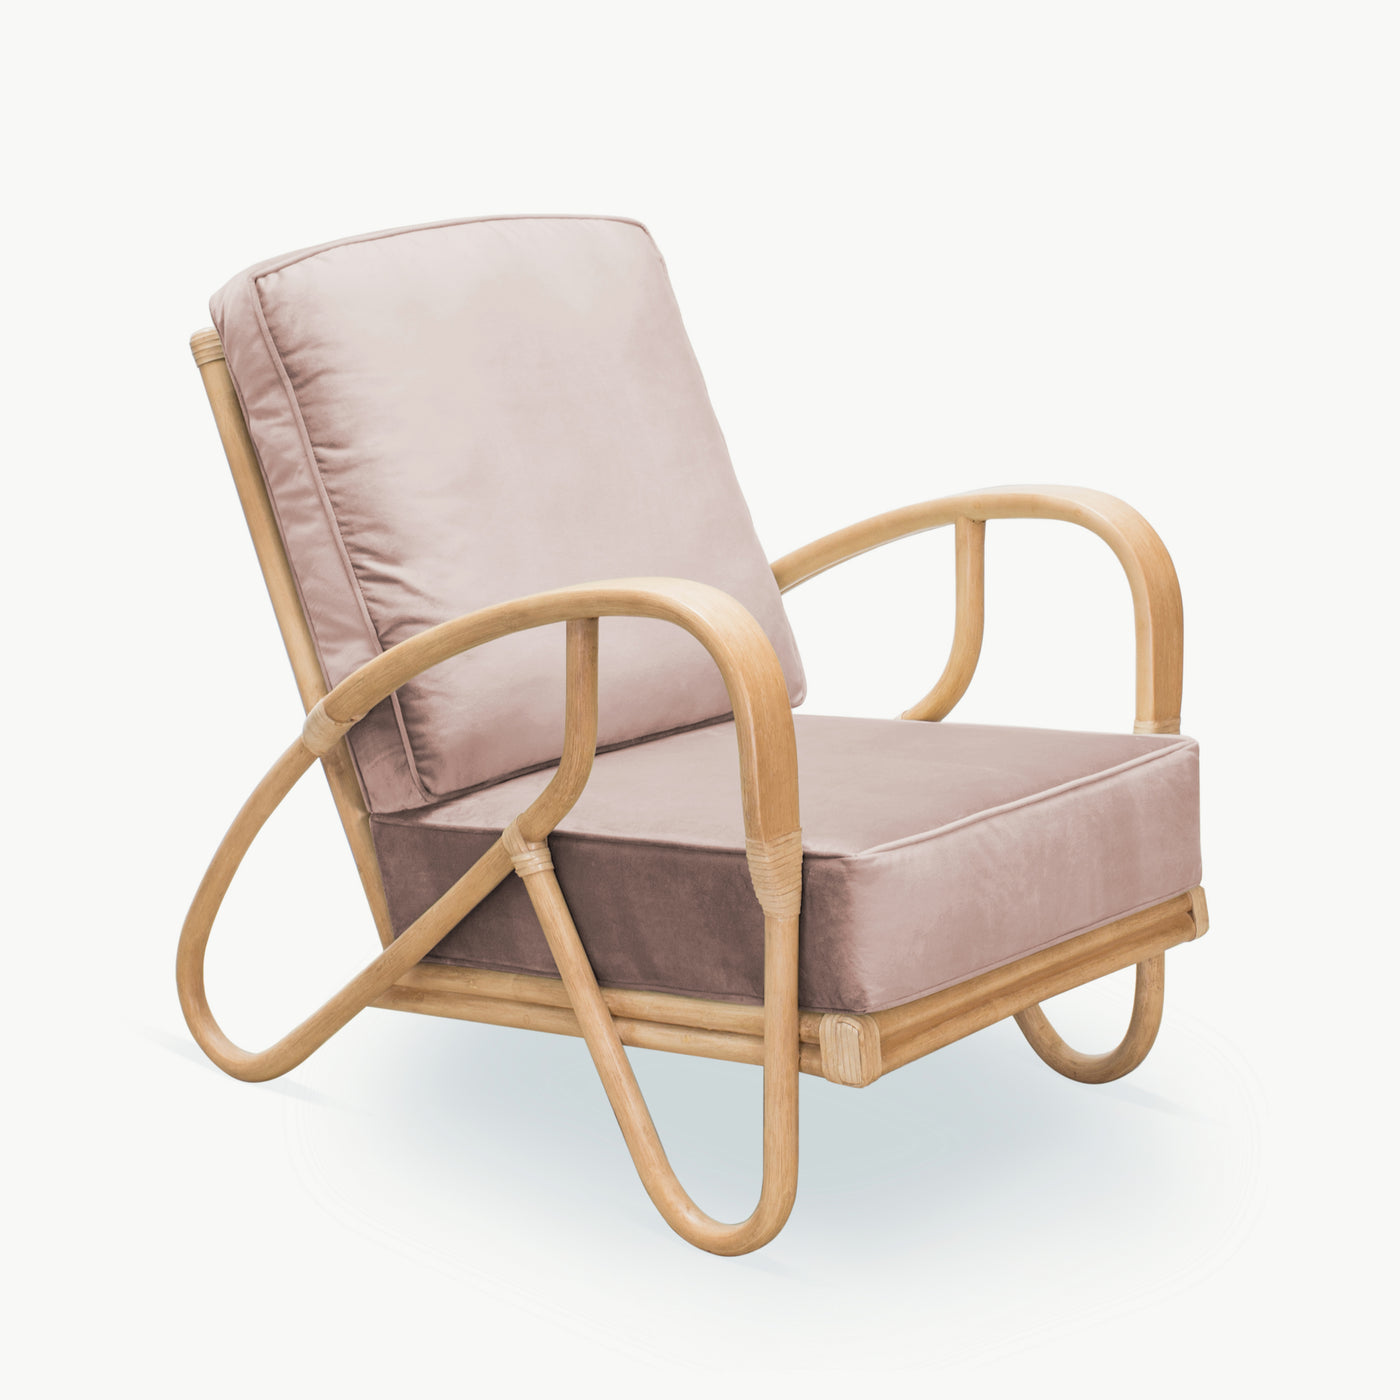 THE MAVERICK Cane Chair - Dusty Pink